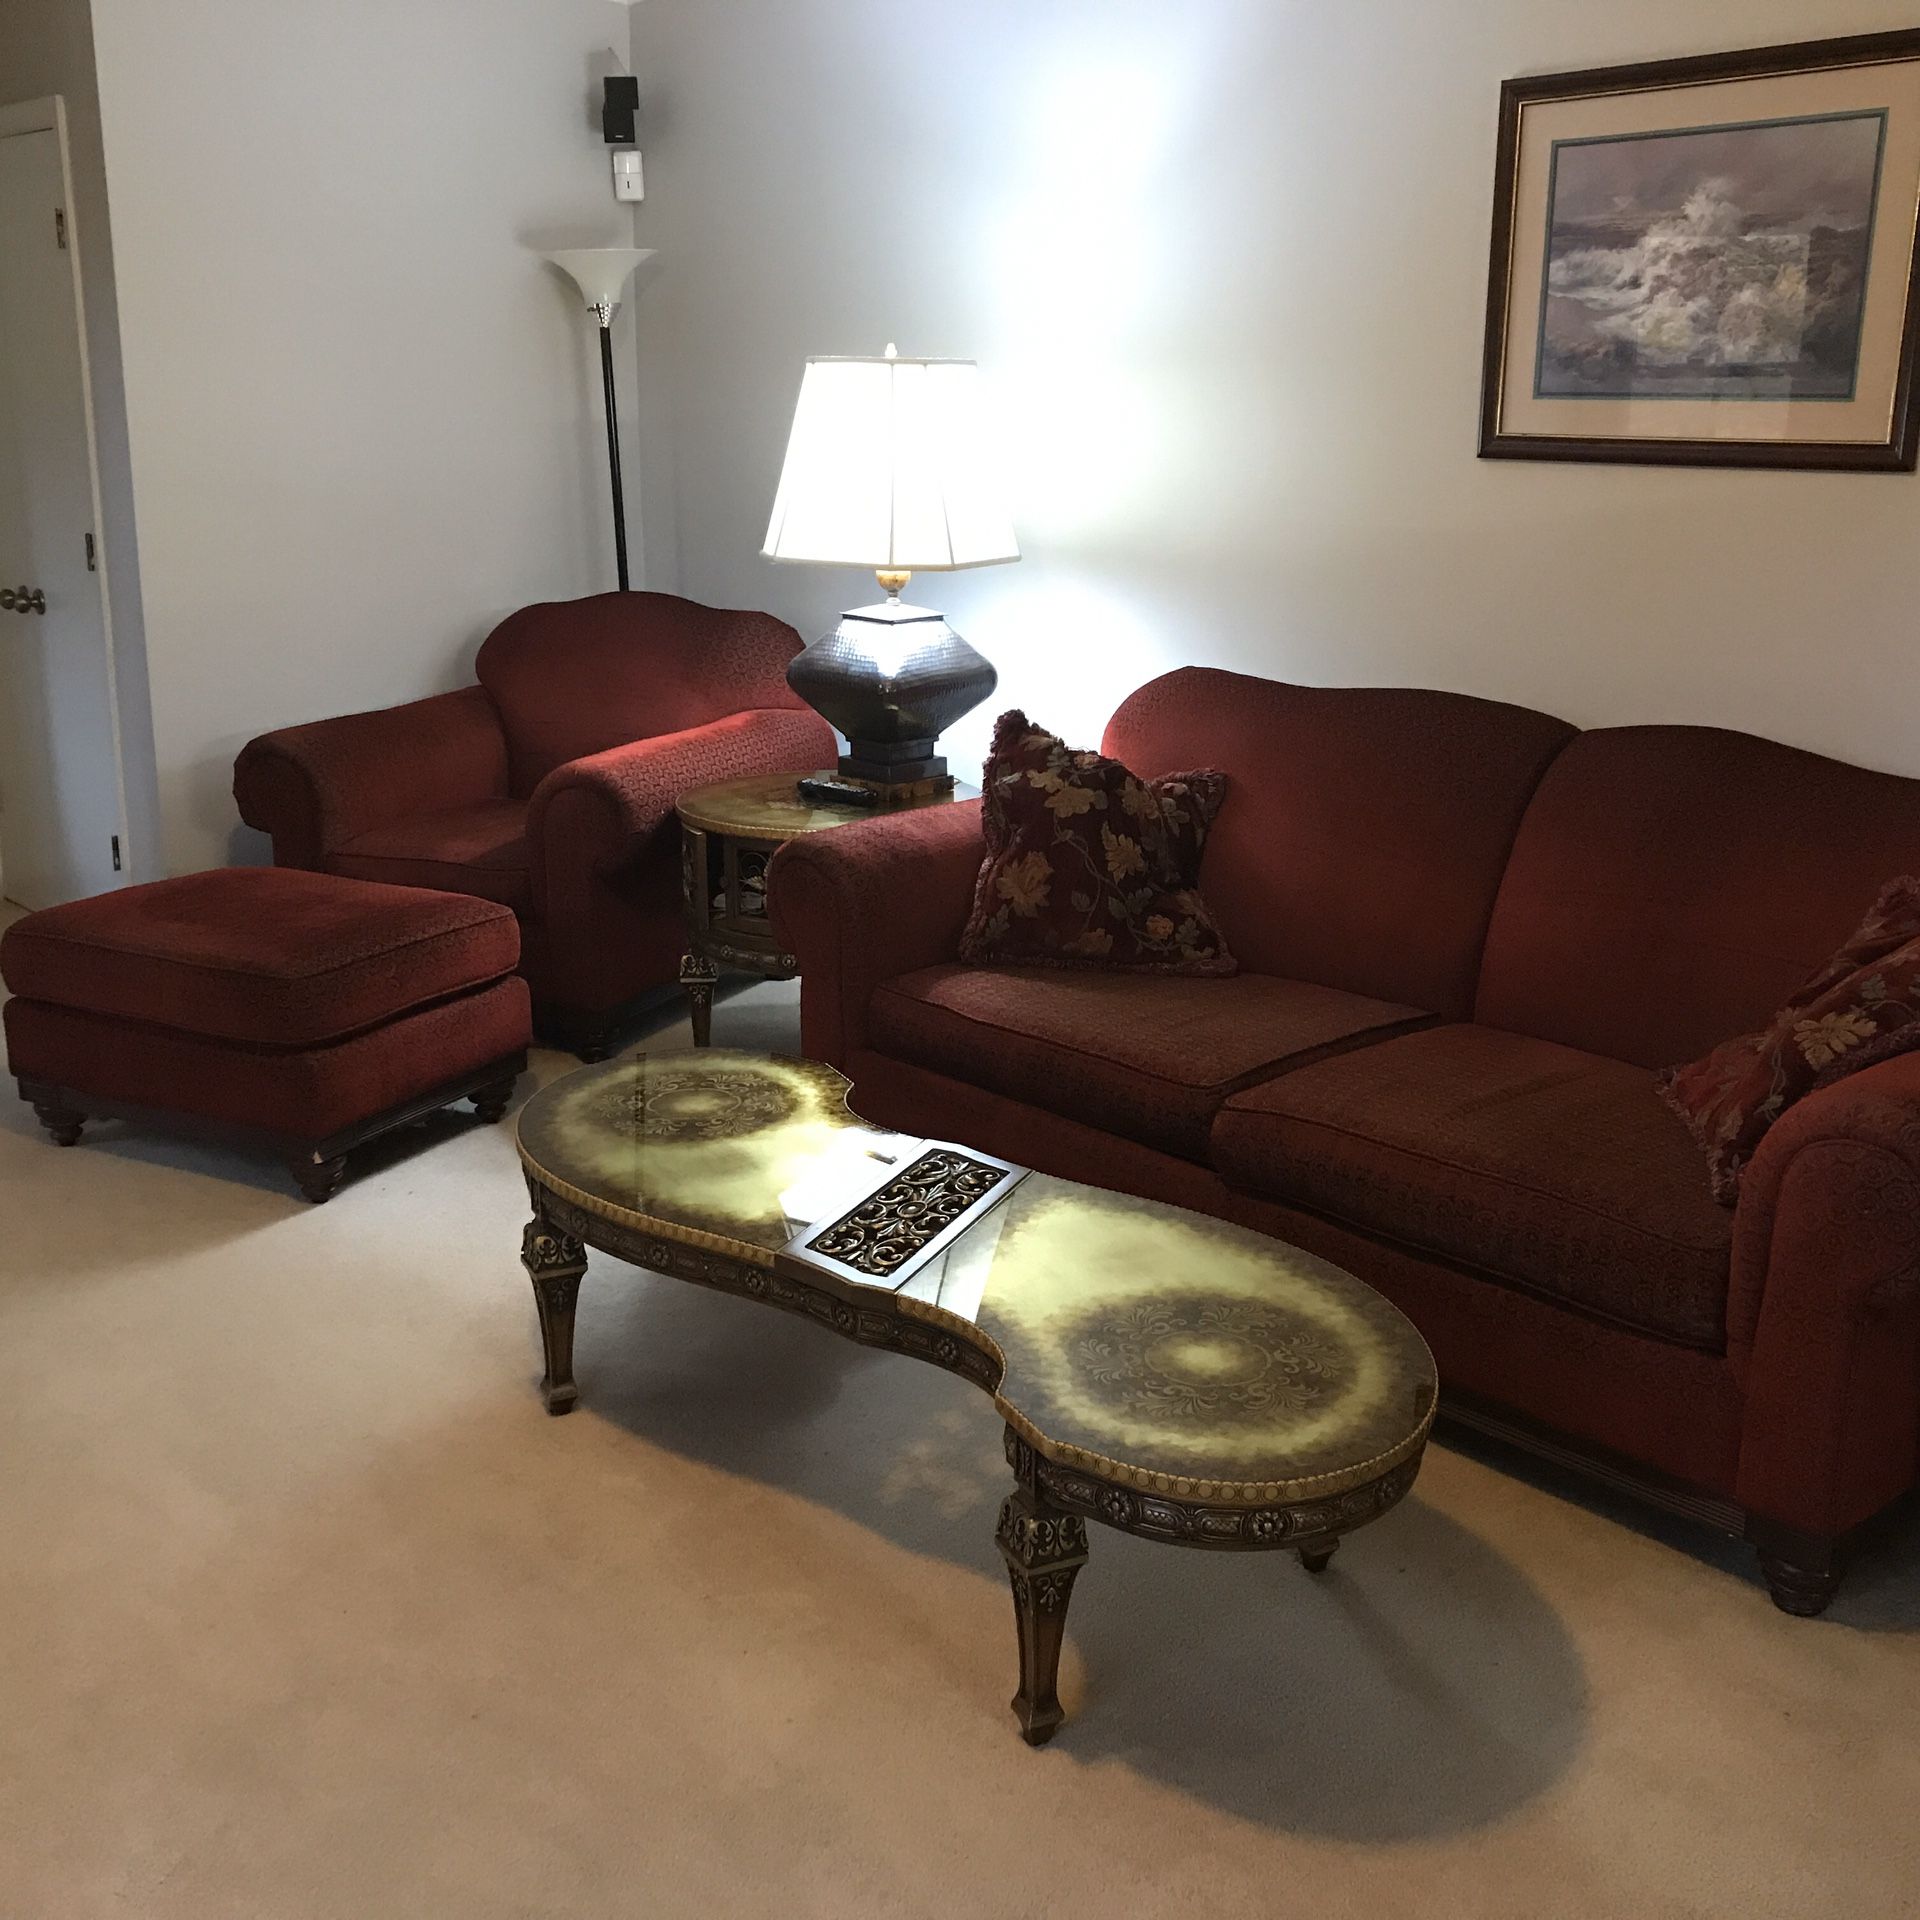 Rowe Couch/sofa with chair and ottoman $75 OBO